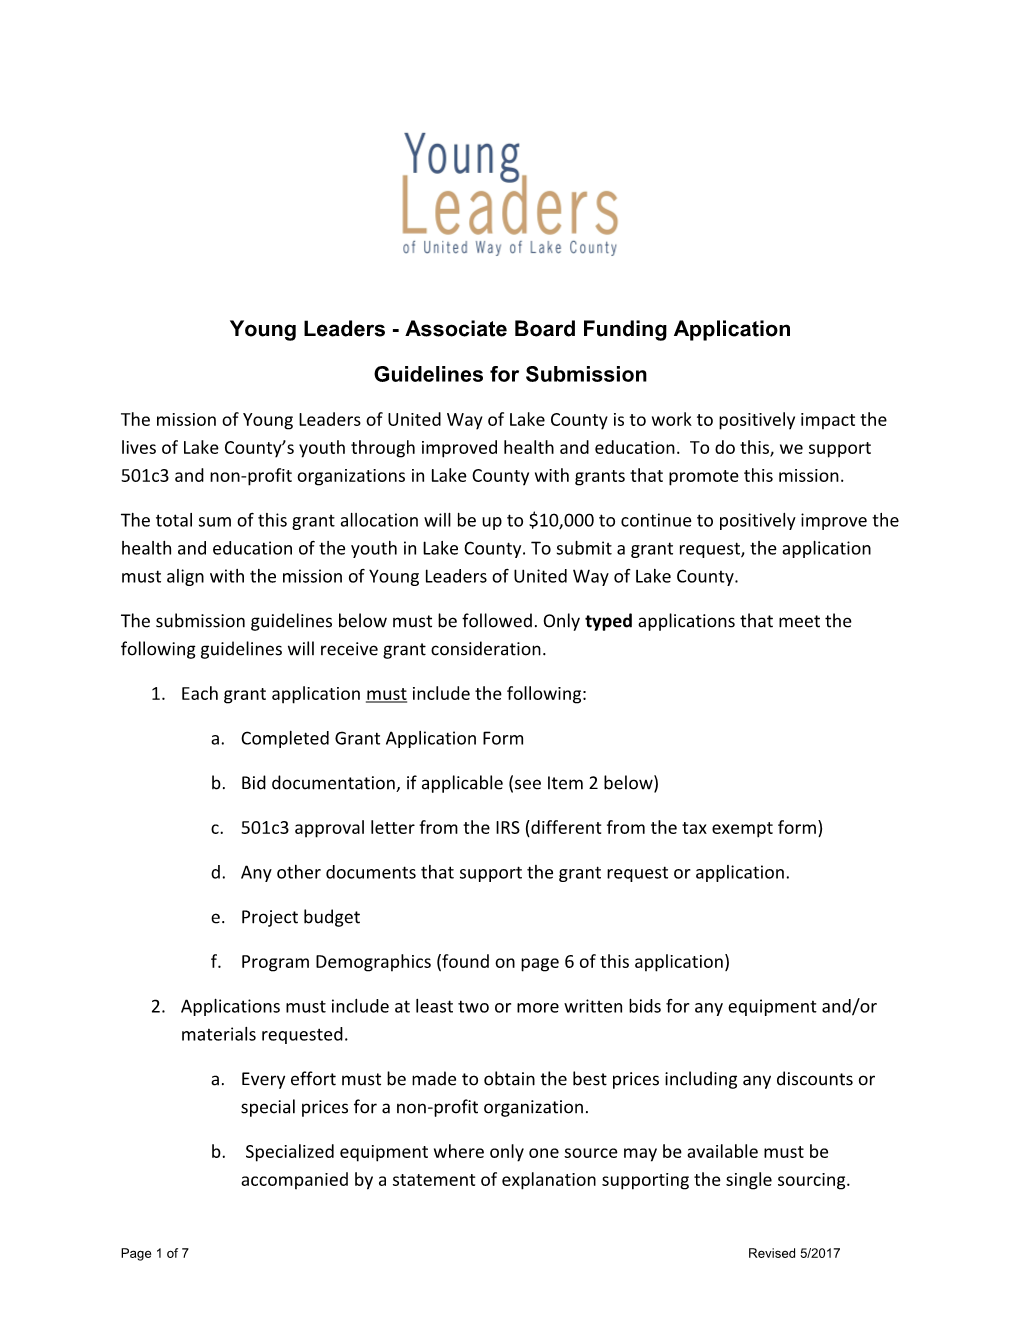 Young Leaders - Associate Board Funding Application